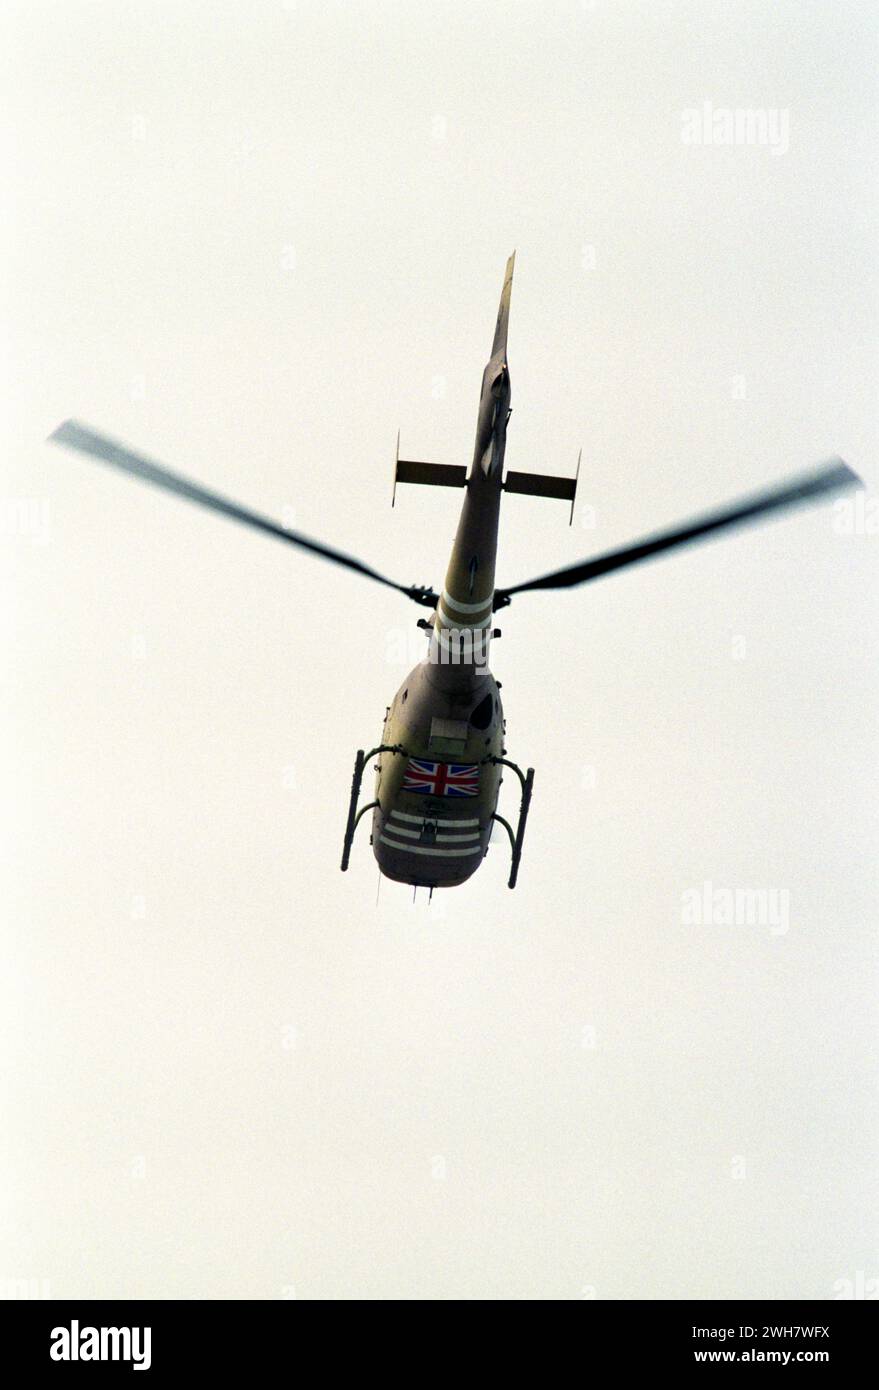 6th March 1991 A British Army Air Corps Gazelle AH.Mk1 helicopter flies overhead in Kuwait City. Stock Photo